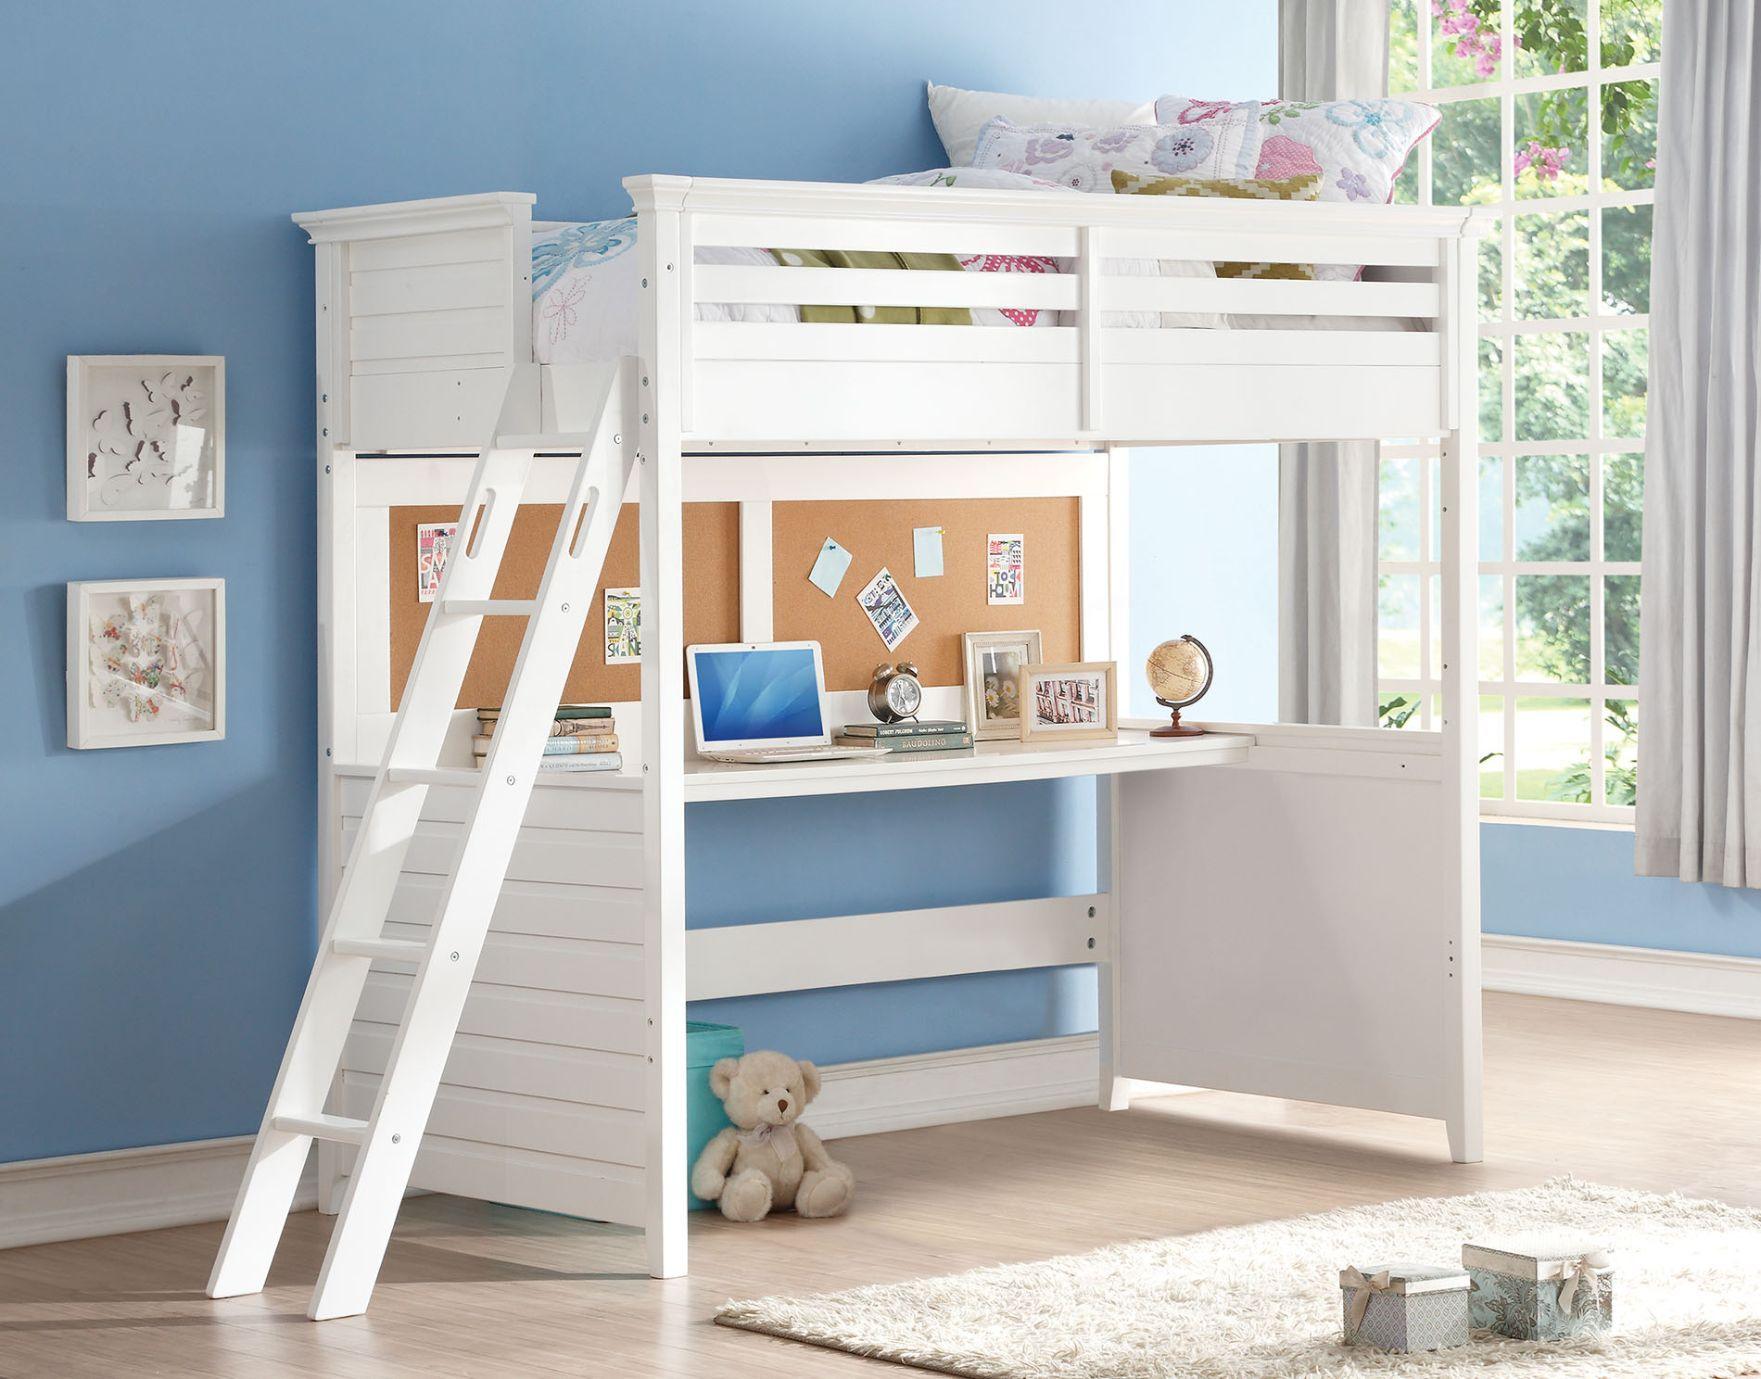 ACME - Lacey - Loft Bed - White - 5th Avenue Furniture